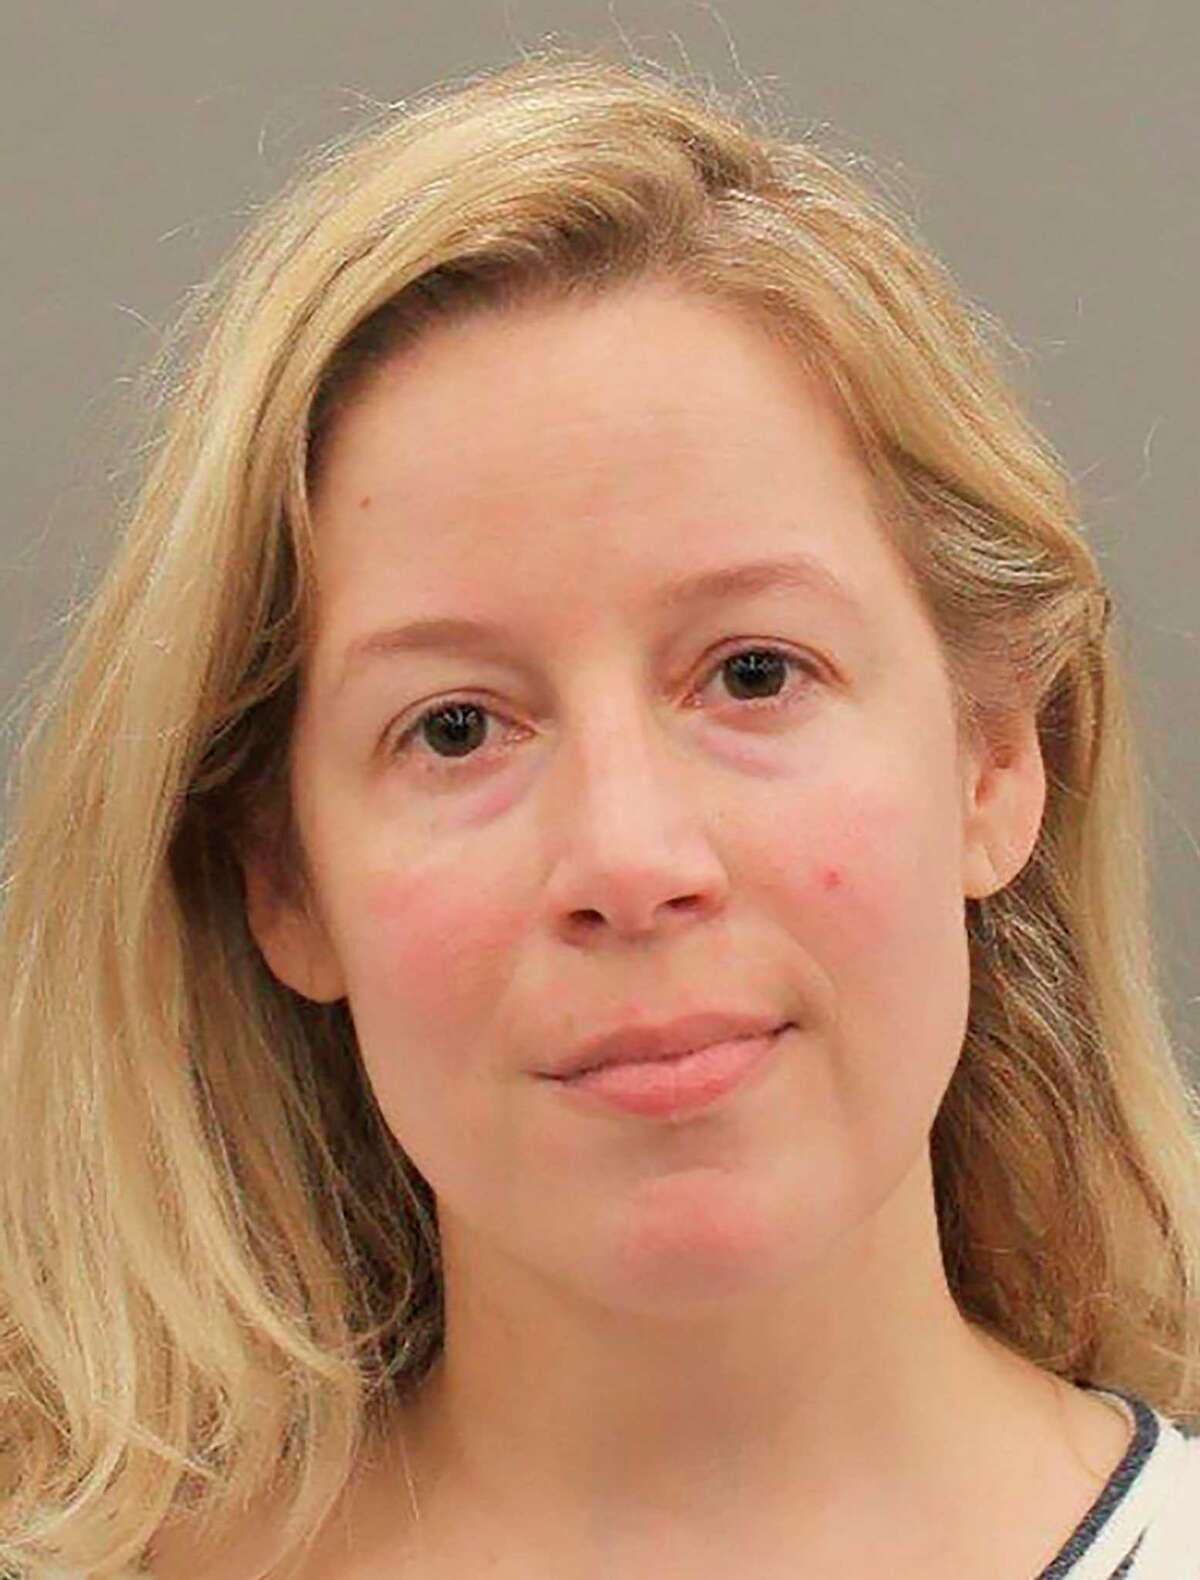 This undated photo provided by the Harris County District Attorney's Office shows Leslie Ann Caron. Prosecutors in Houston said Wednesday, May 20, 2020, that Caron, the girlfriend former Texas Lt. Gov. David Dewhurst, was arrested on charges of injuring the longtime Republican officeholder in an alleged attack that broke two of his ribs. Caron was charged with injury to an elderly person, a third-degree felony in Texas. (Harris County District Attorney's Office via AP)